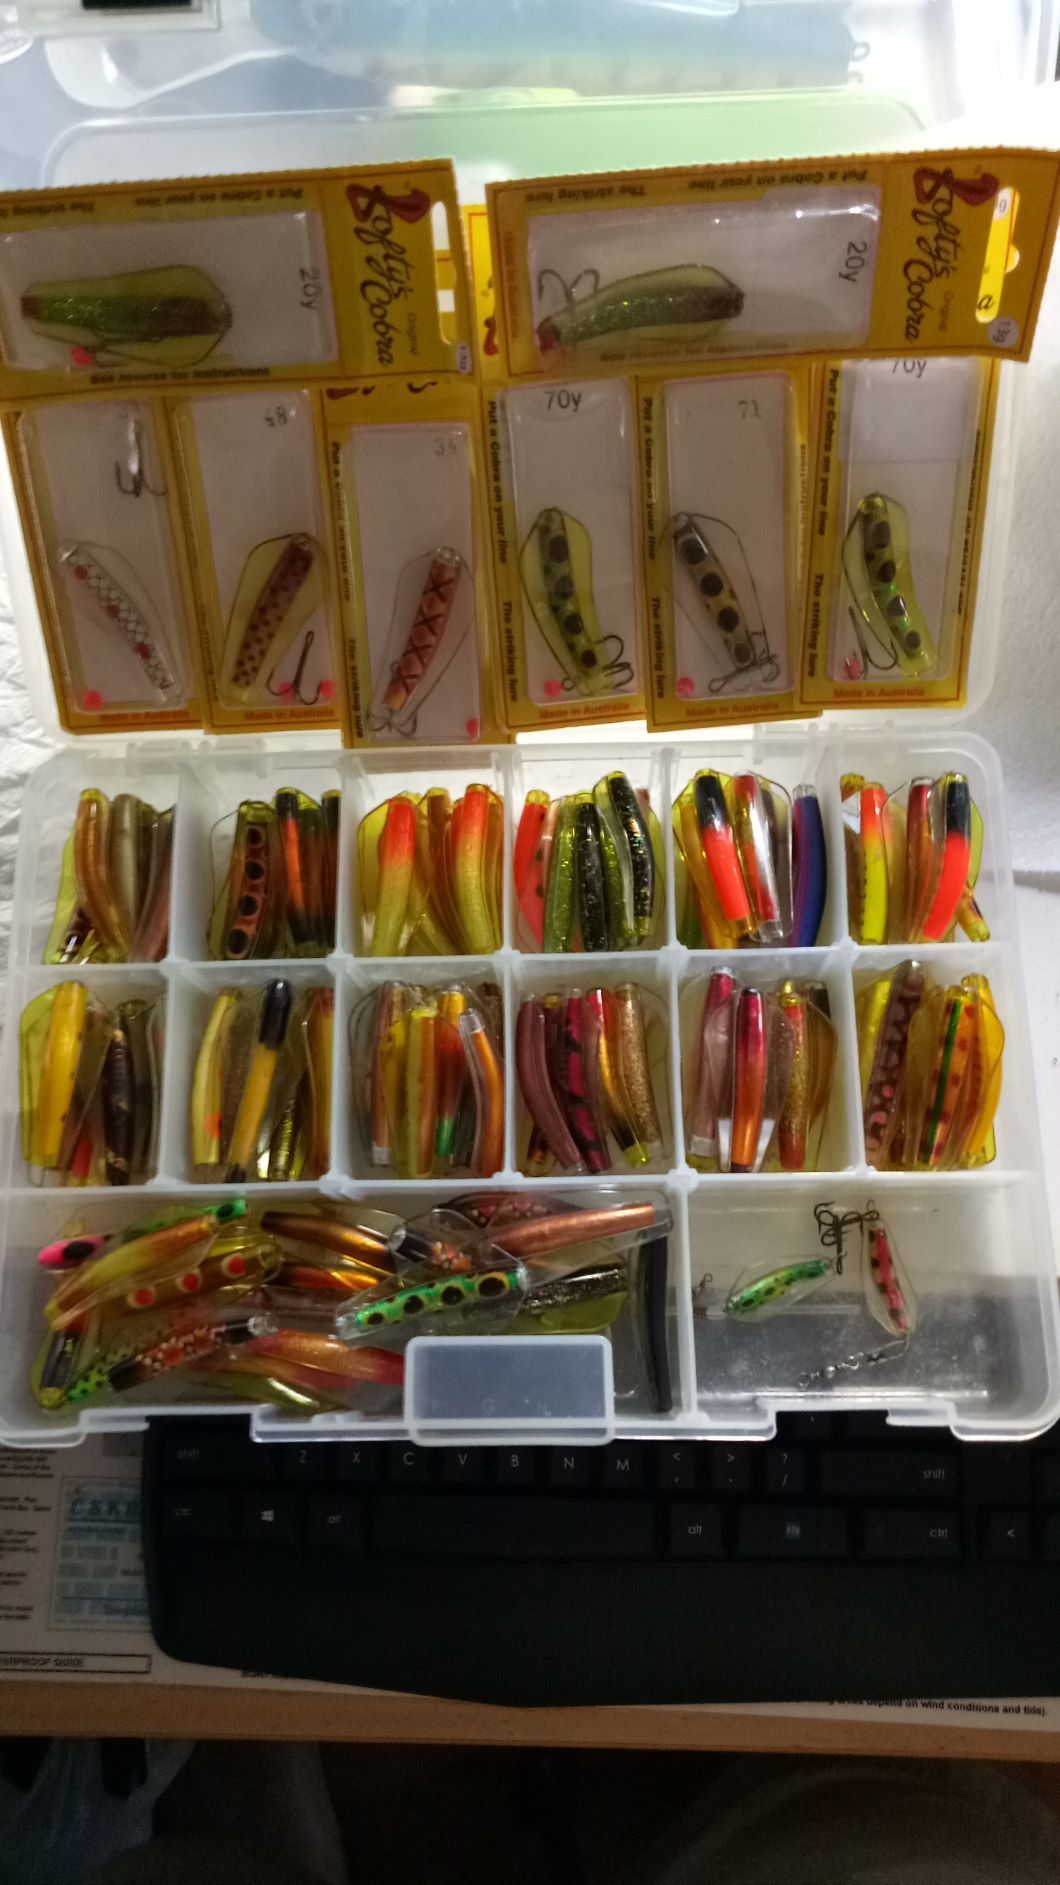 Show us your lure collection - Freshwater Fishing Chat - DECKEE